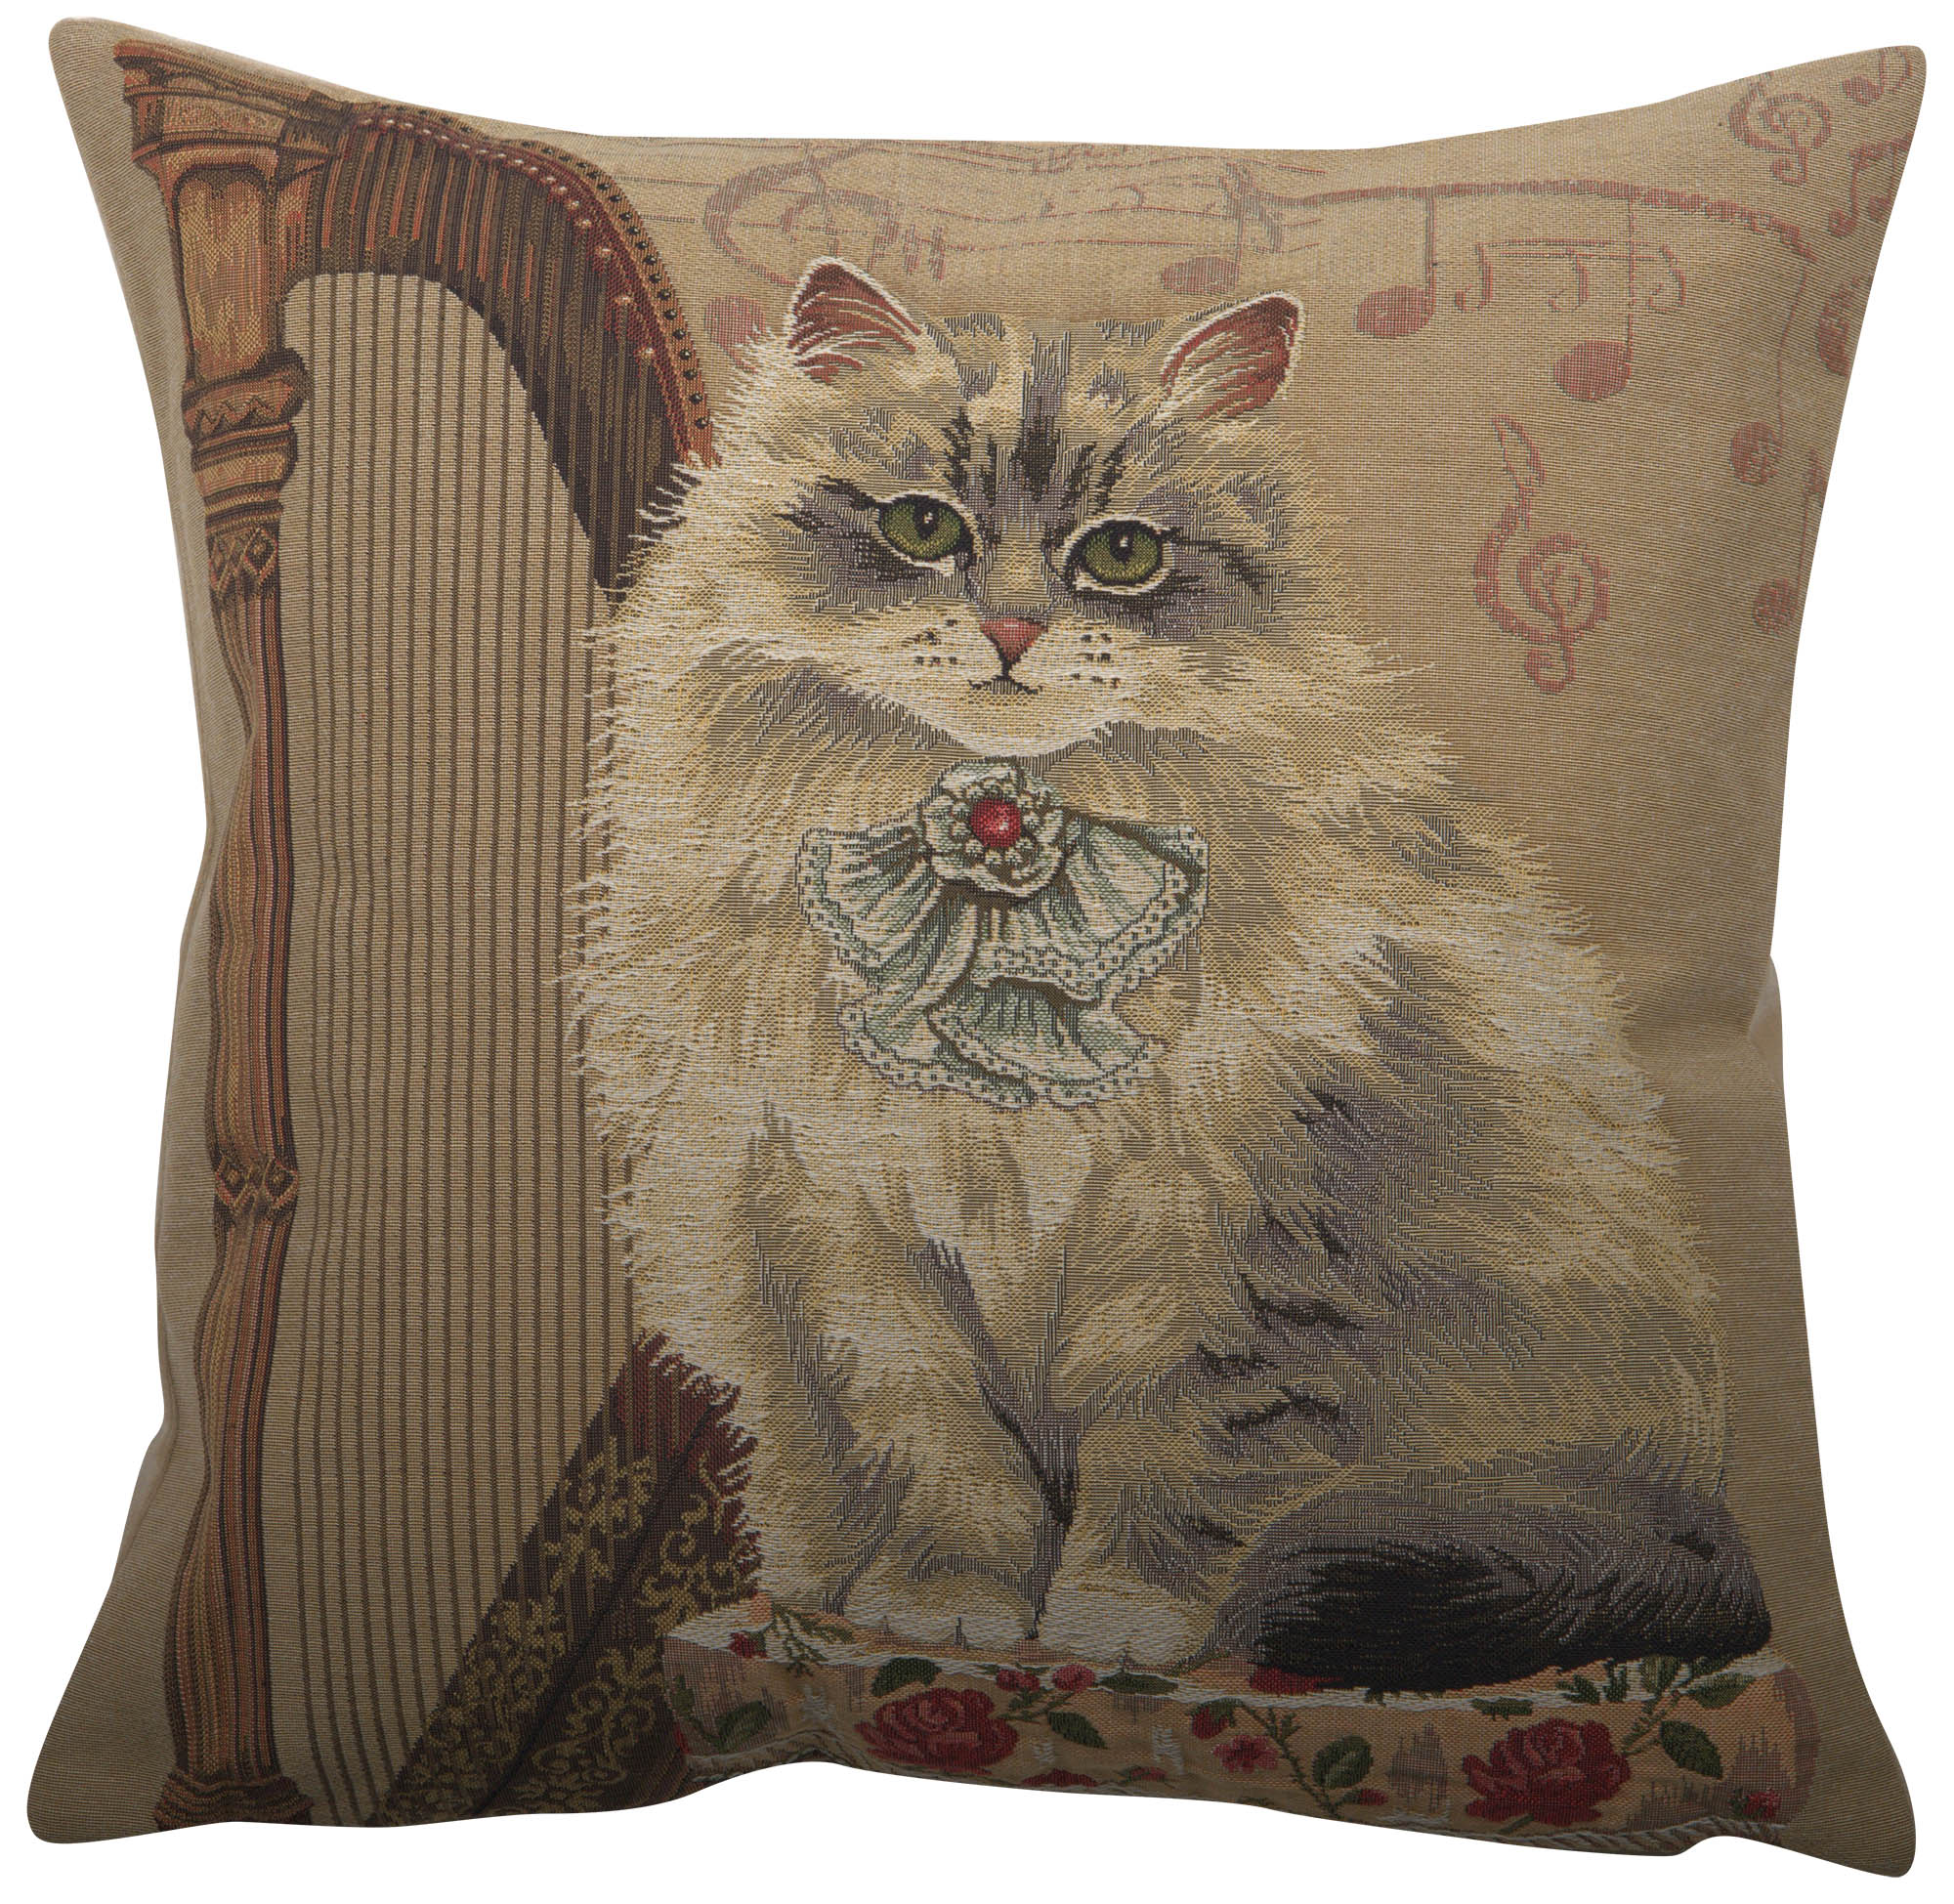 Cat With Harp European Tapestry Cushion Cover Home Decor Belgian Pillow 18x18 in